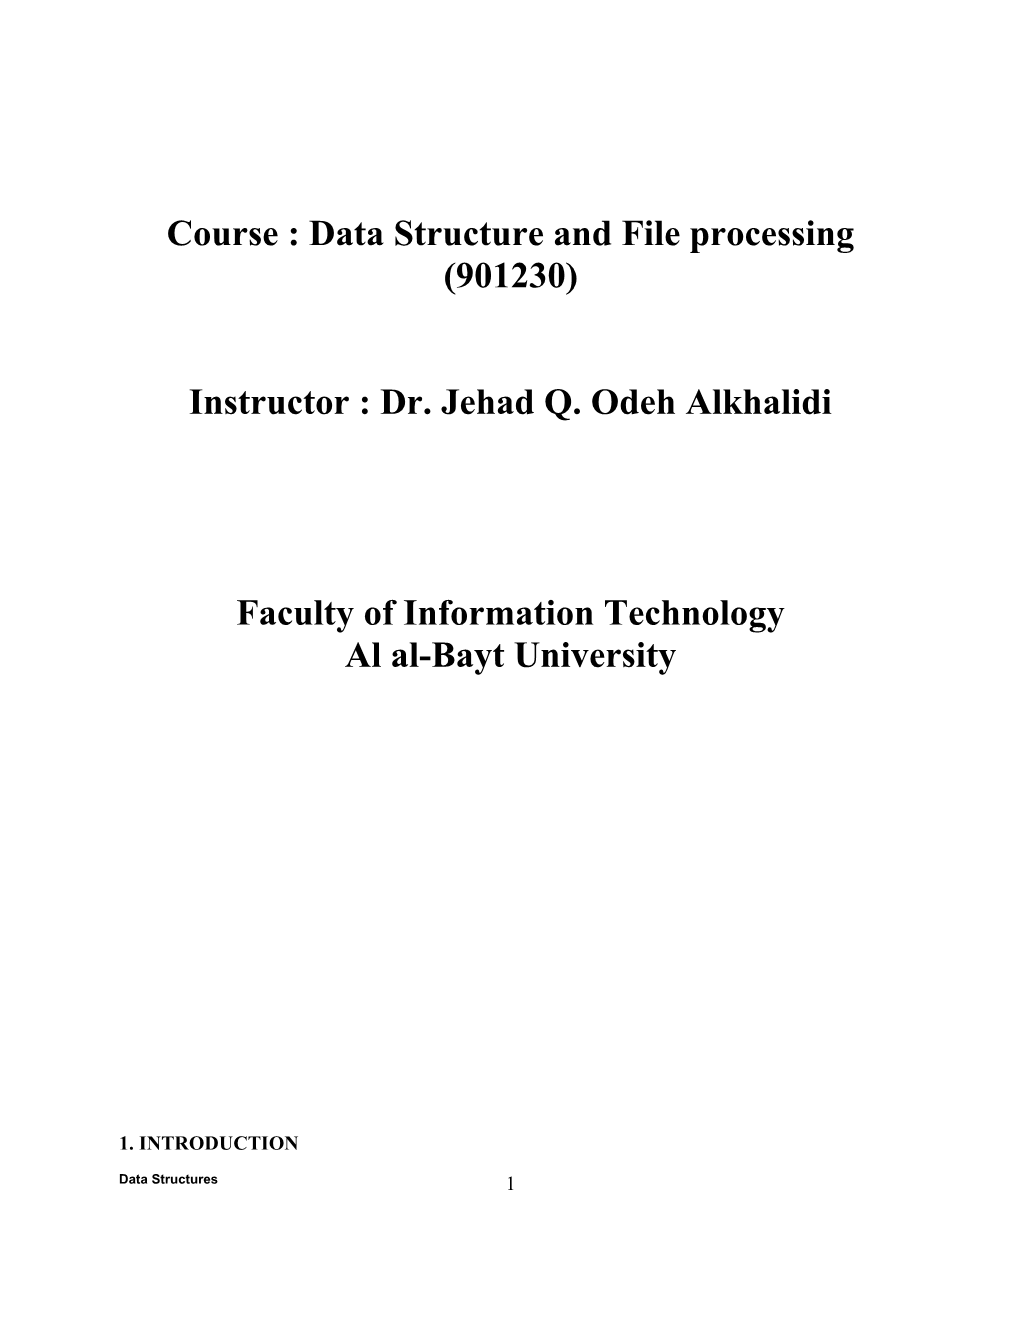 Course : Data Structure and File Processing (901230)